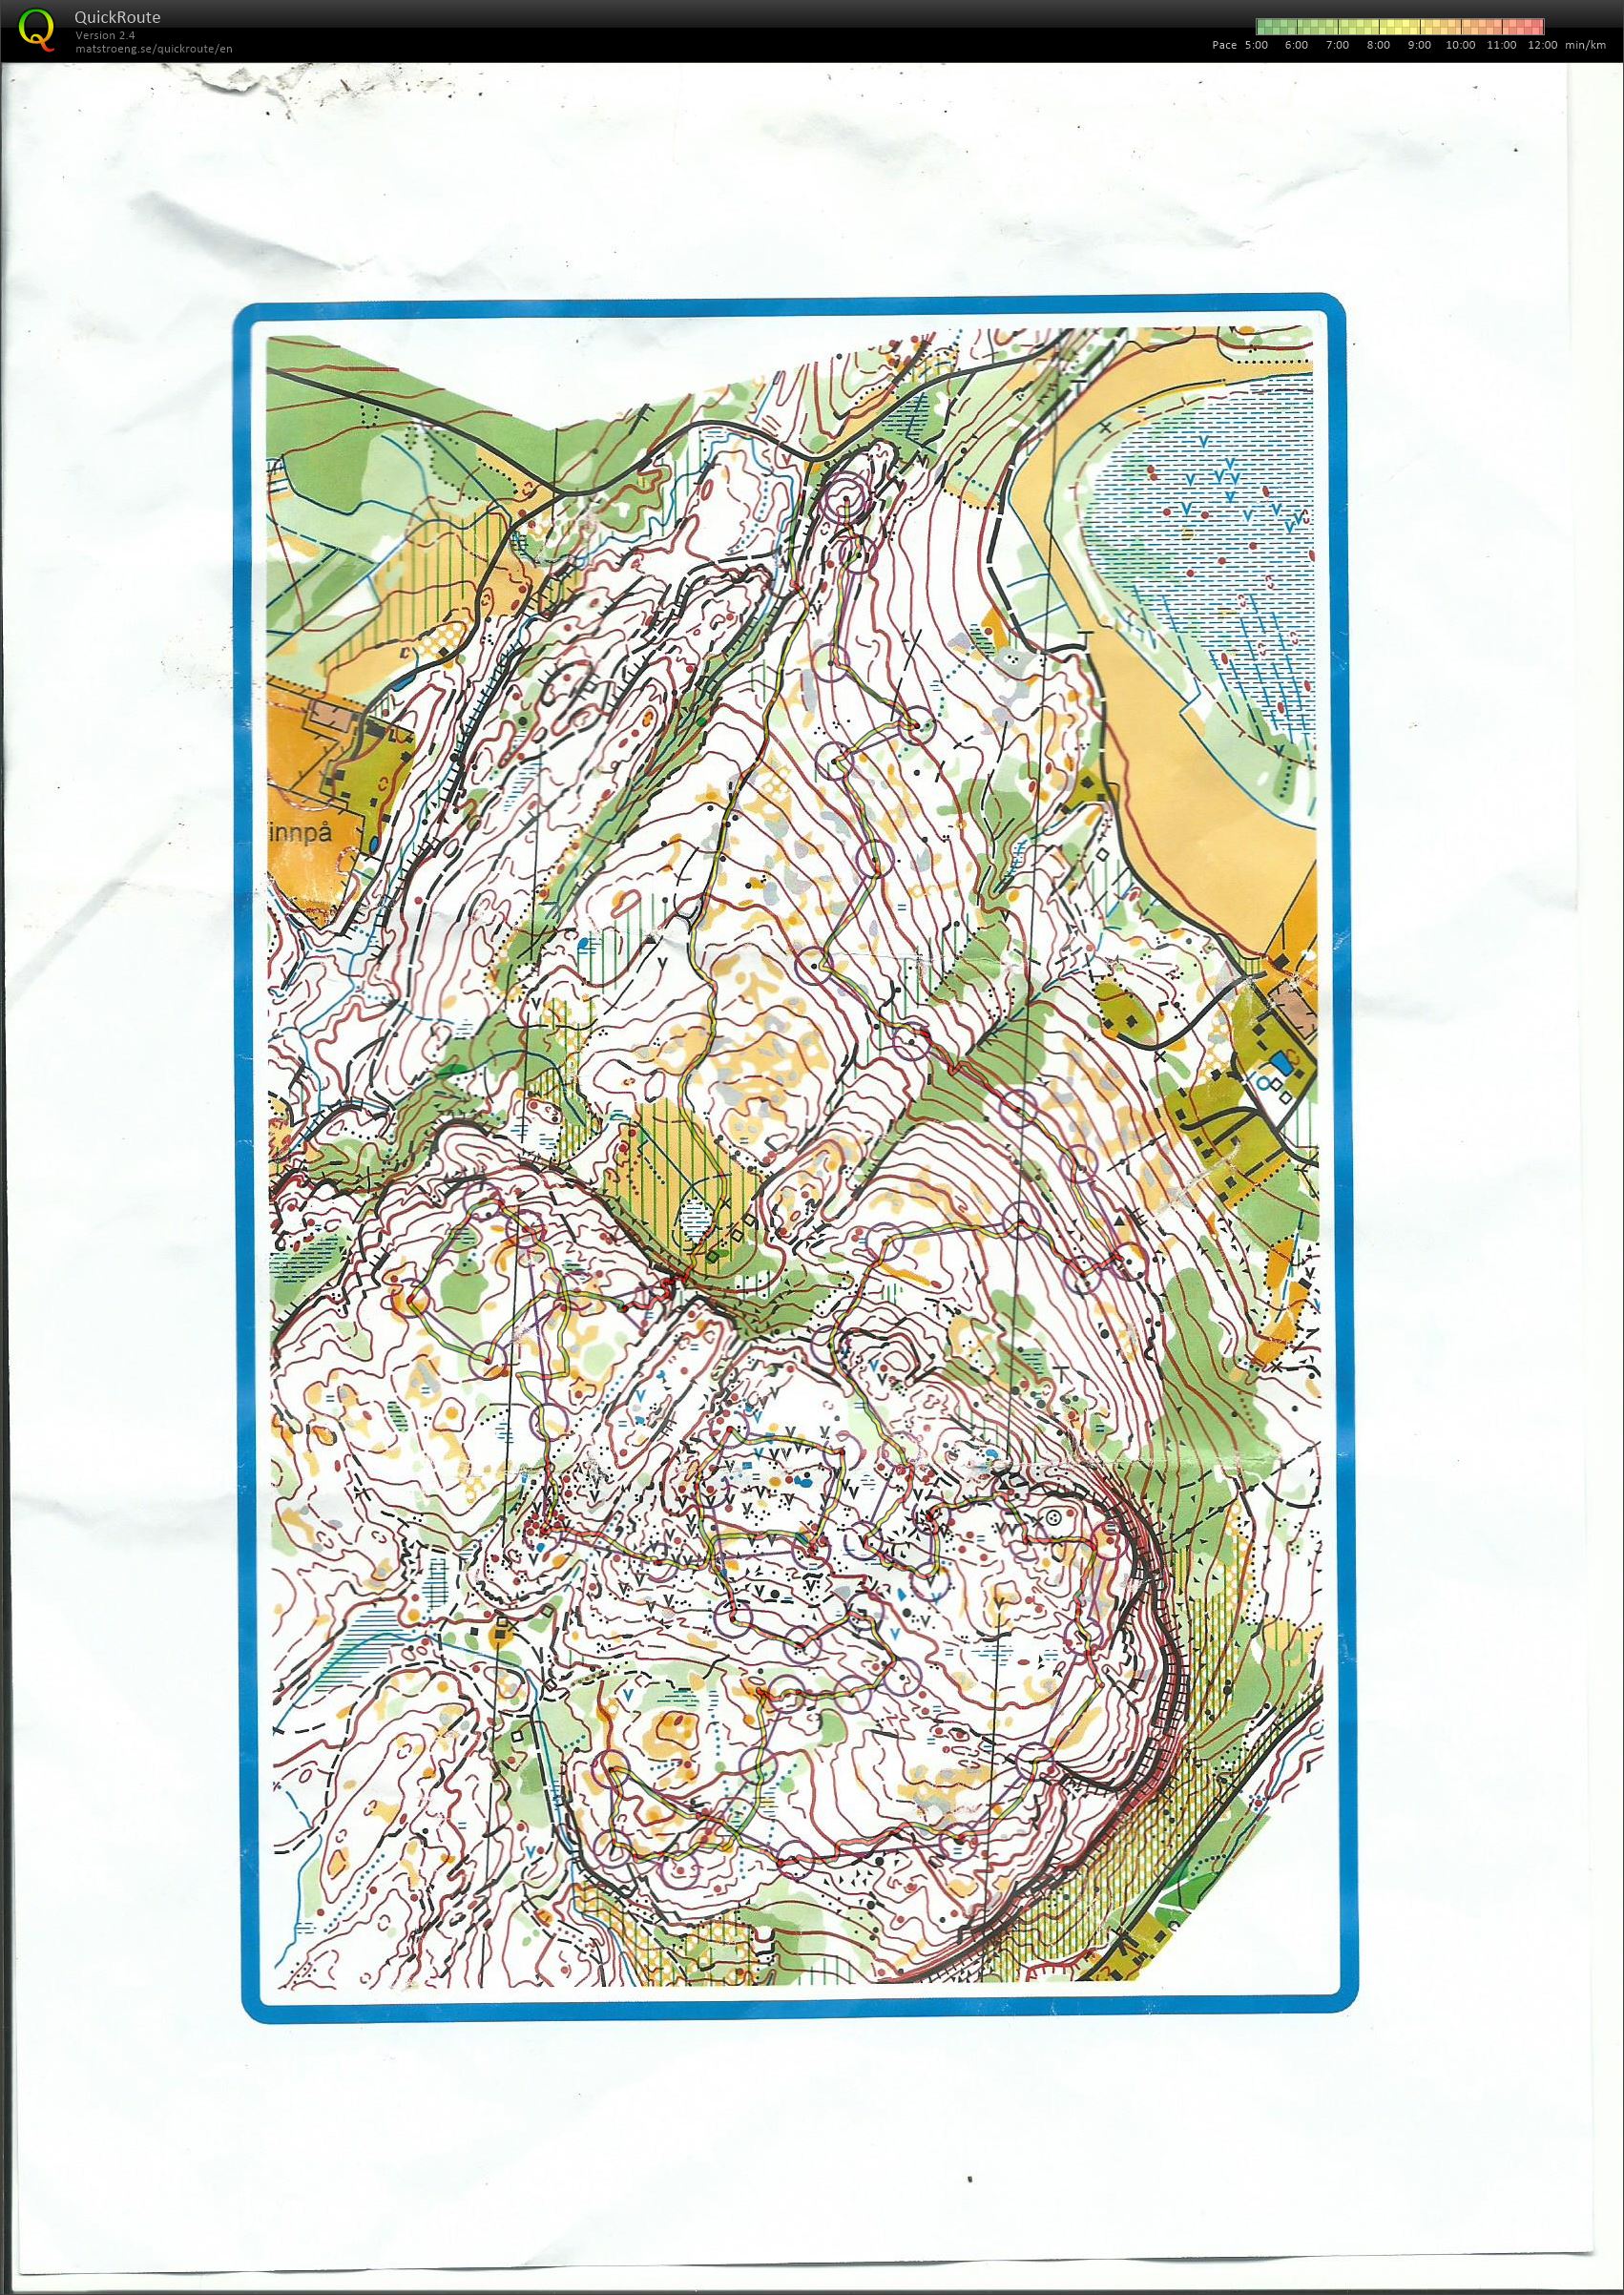 FSK control picking (WOC 2016 training for some...) (06.12.2015)